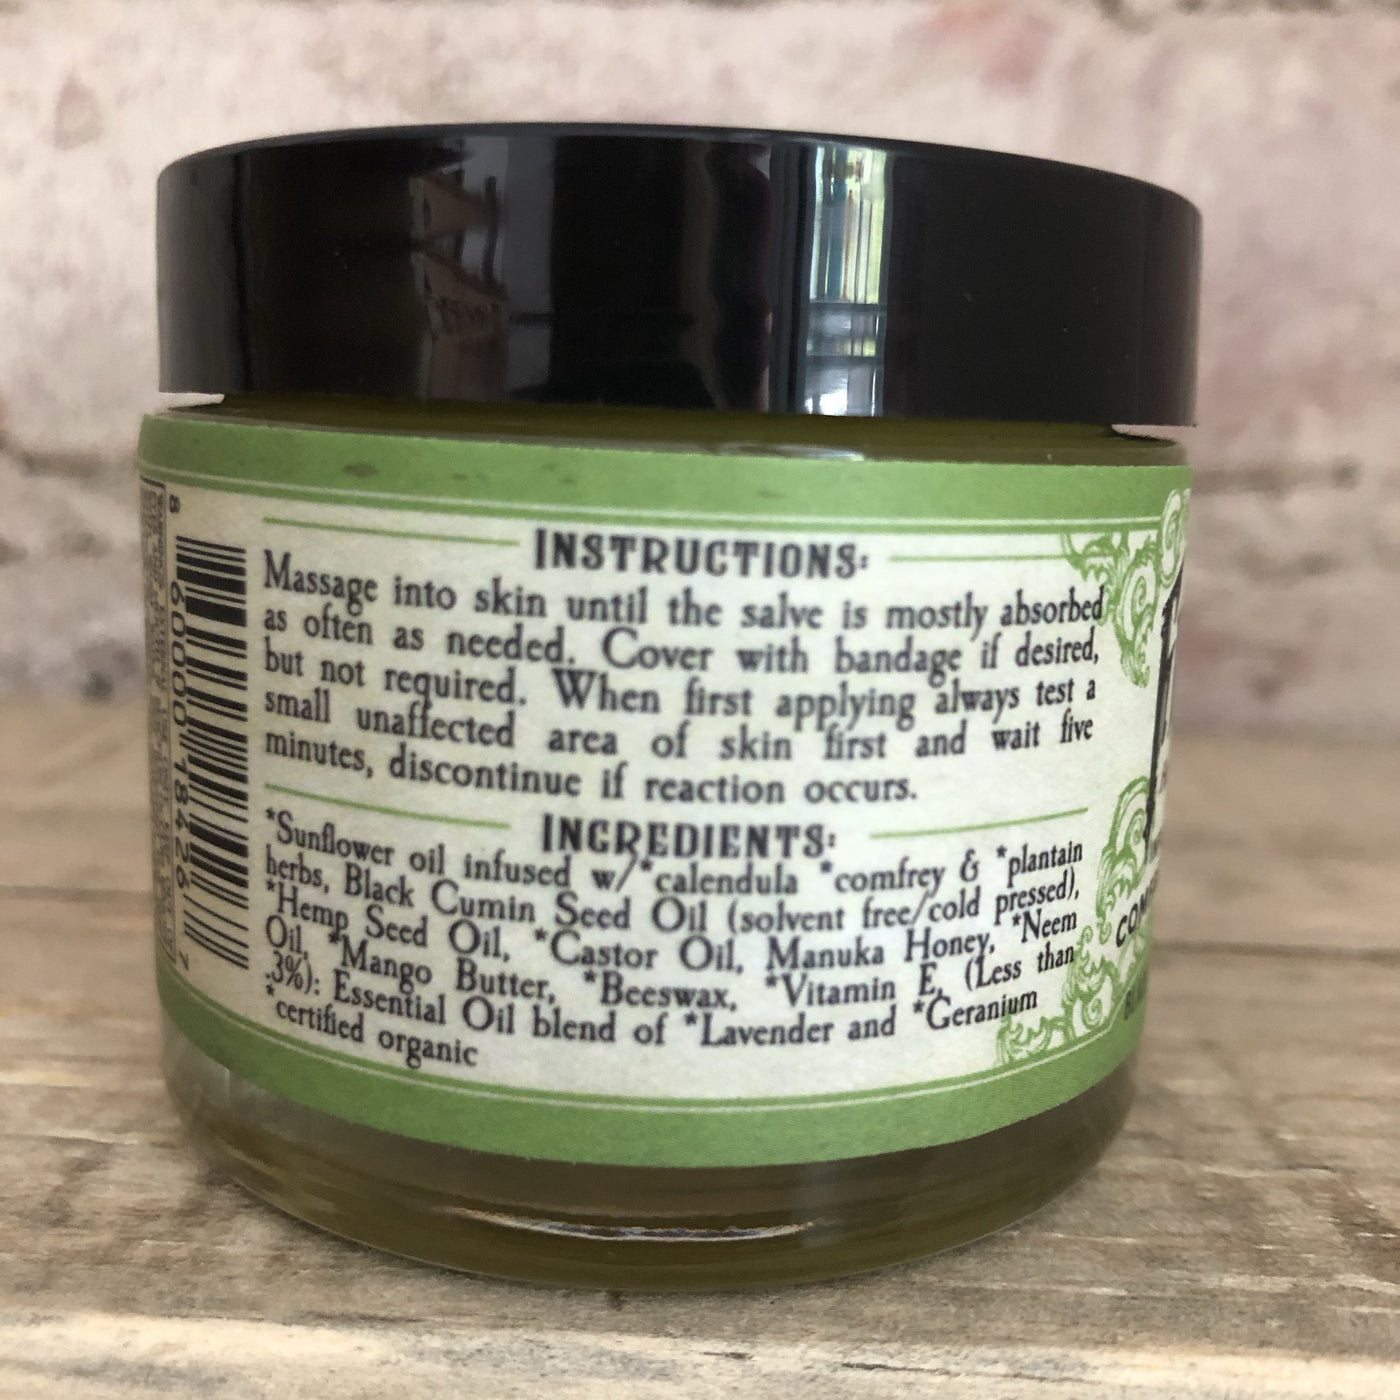 Local First Aid Salve by Roots & Leaves